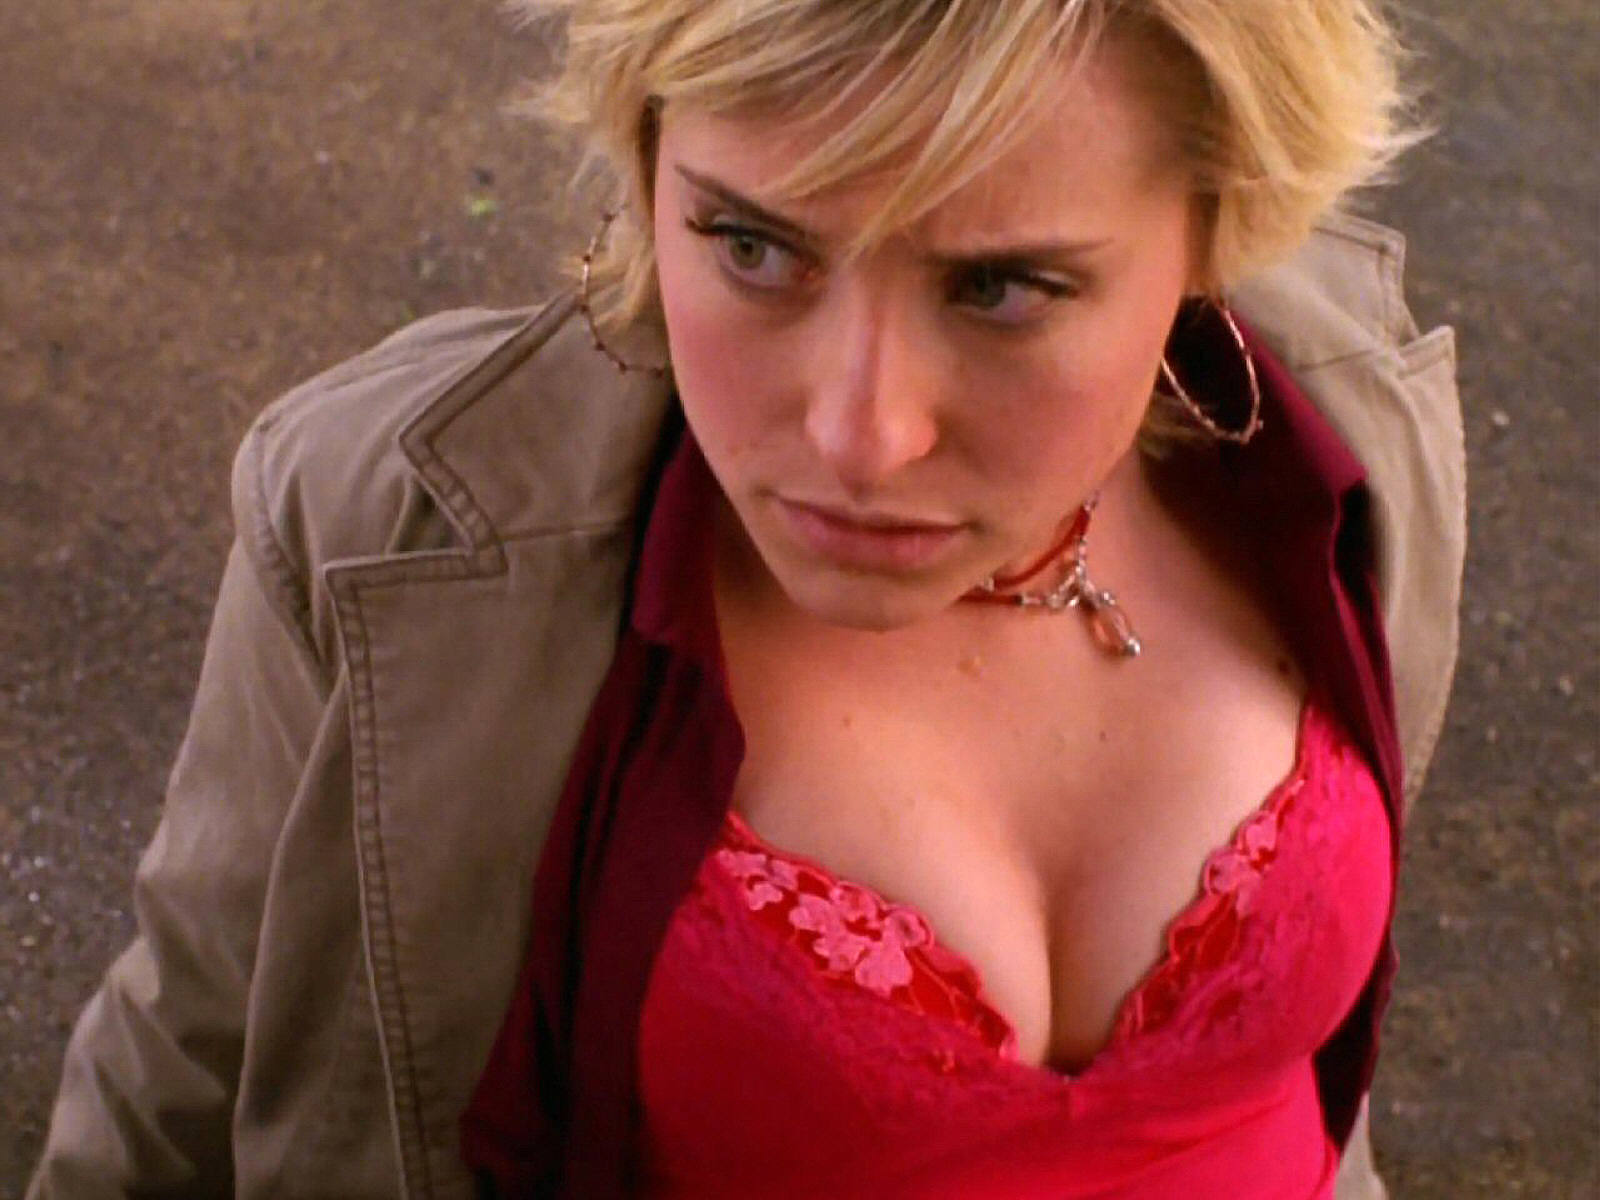 Smallville actress allison mack has pleaded not guilty after being arrested...